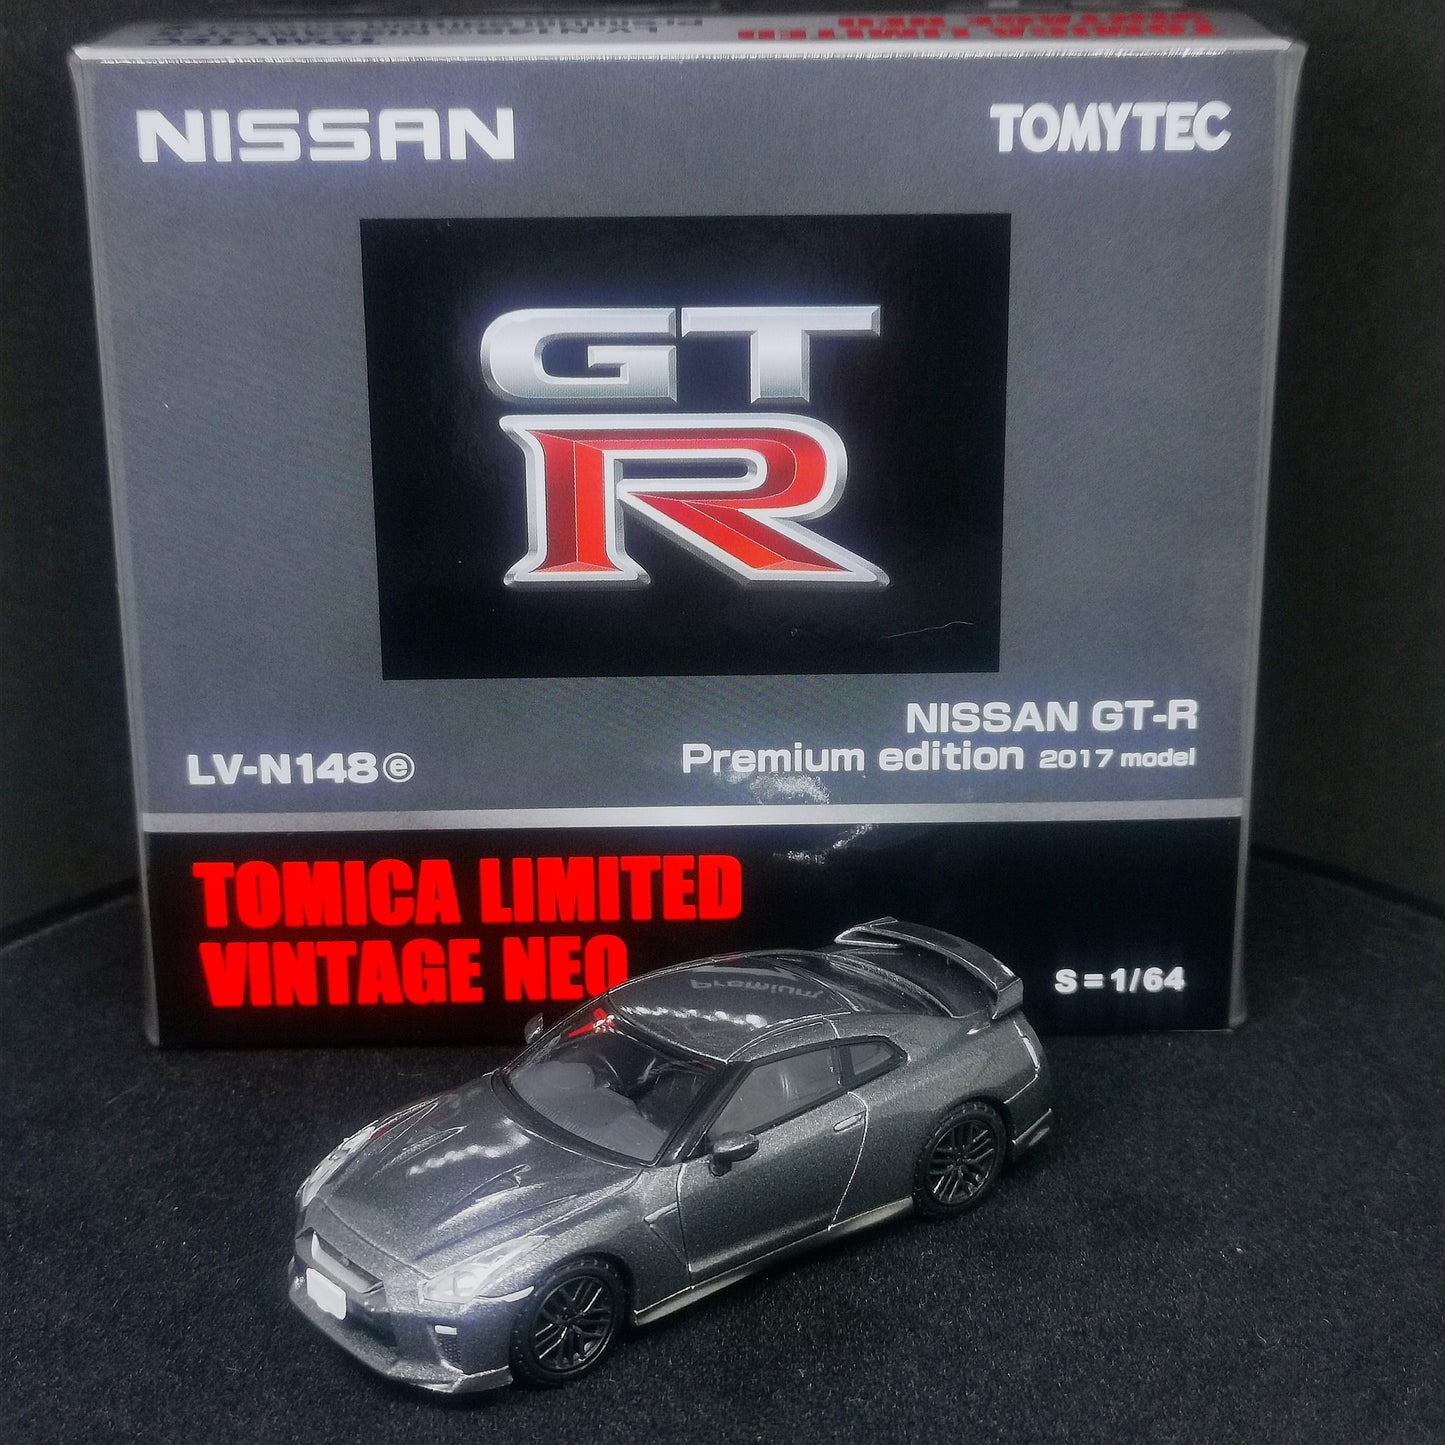 TomytecLimited Vintage Neo LV-N148e Nissan GT-R 2017 1:64 SCALE NEW IN BOX